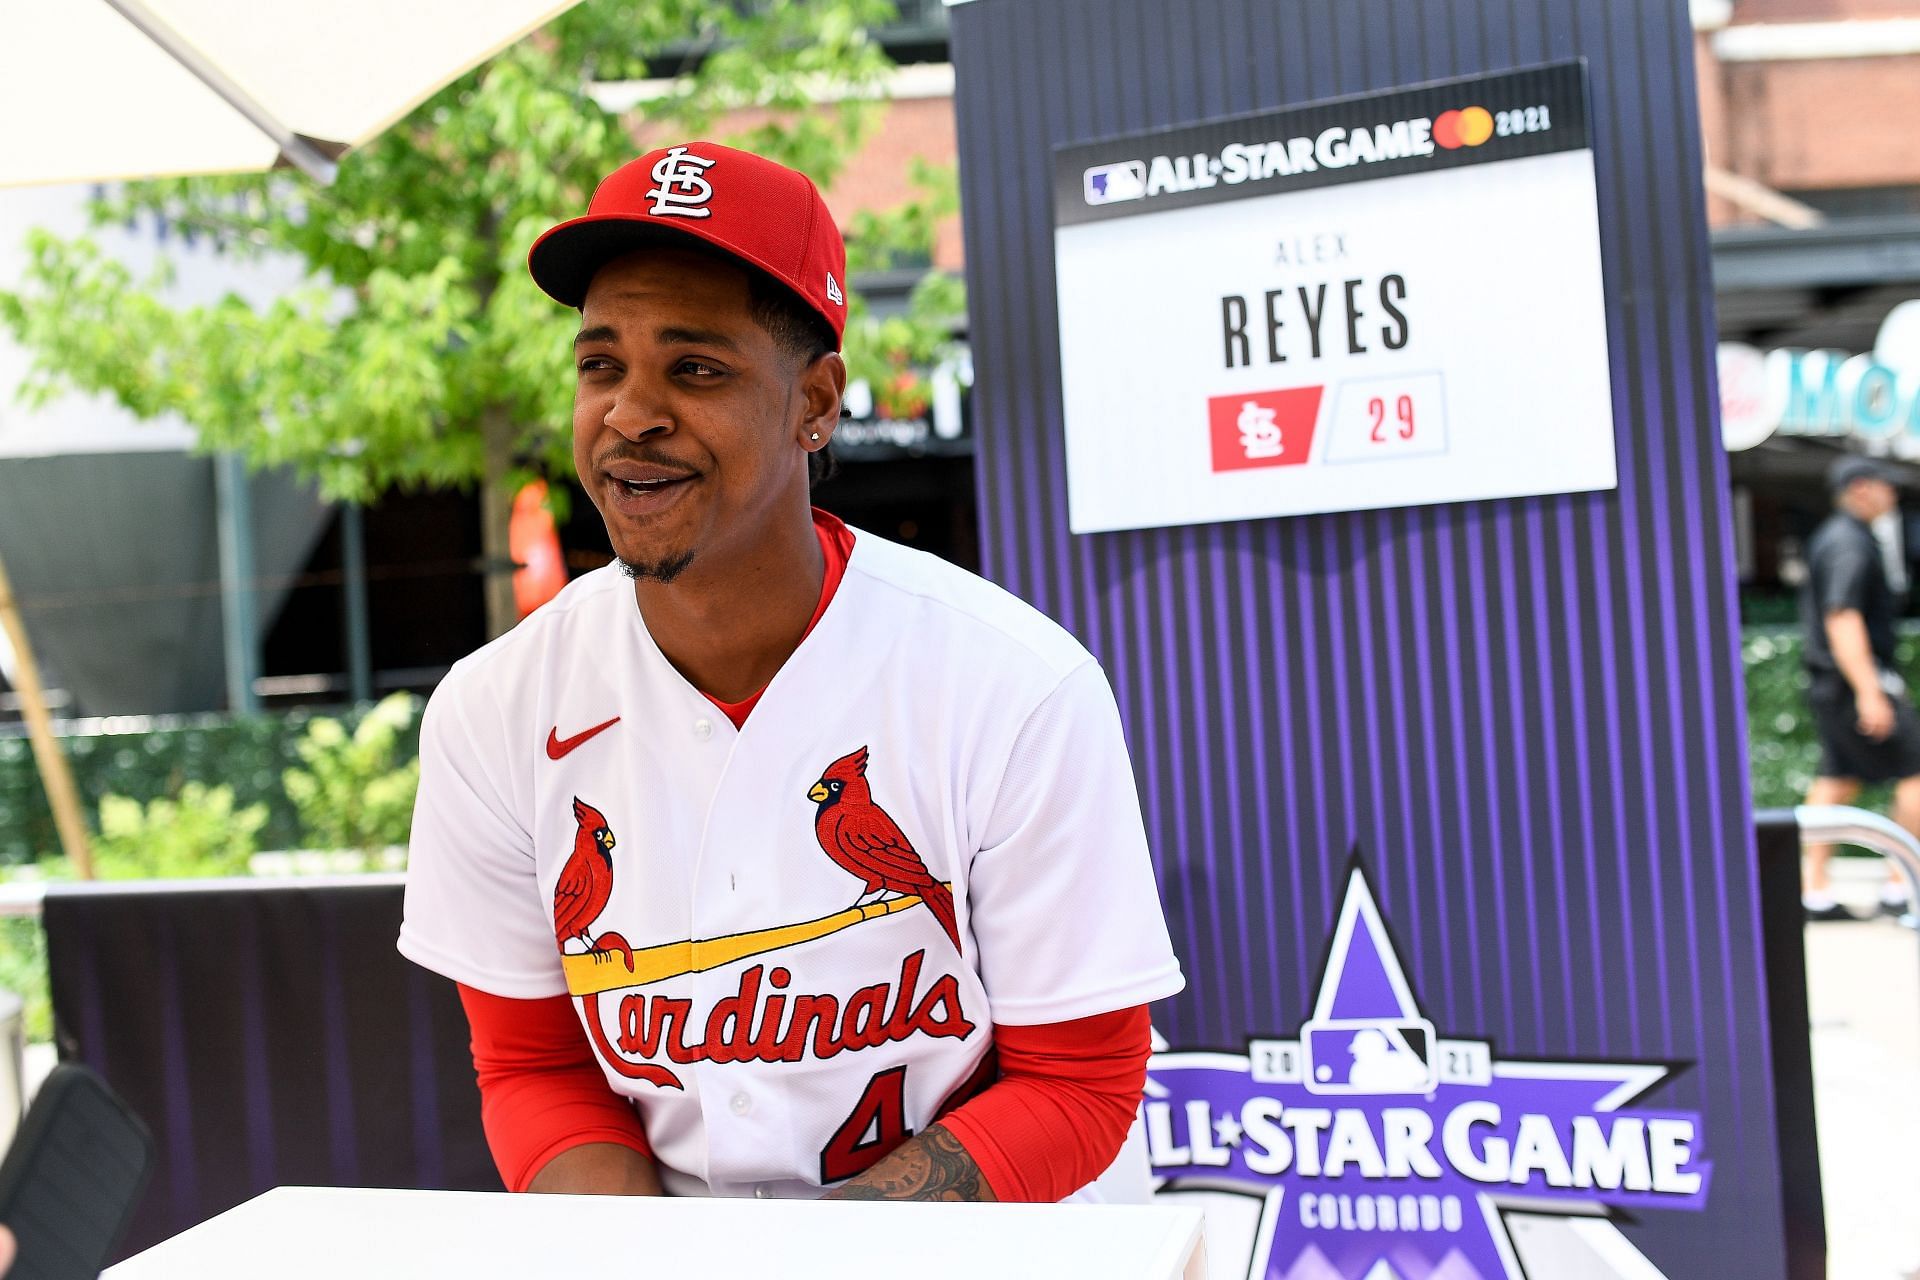 Alex Reyes can be a great option for pitcher-needy teams